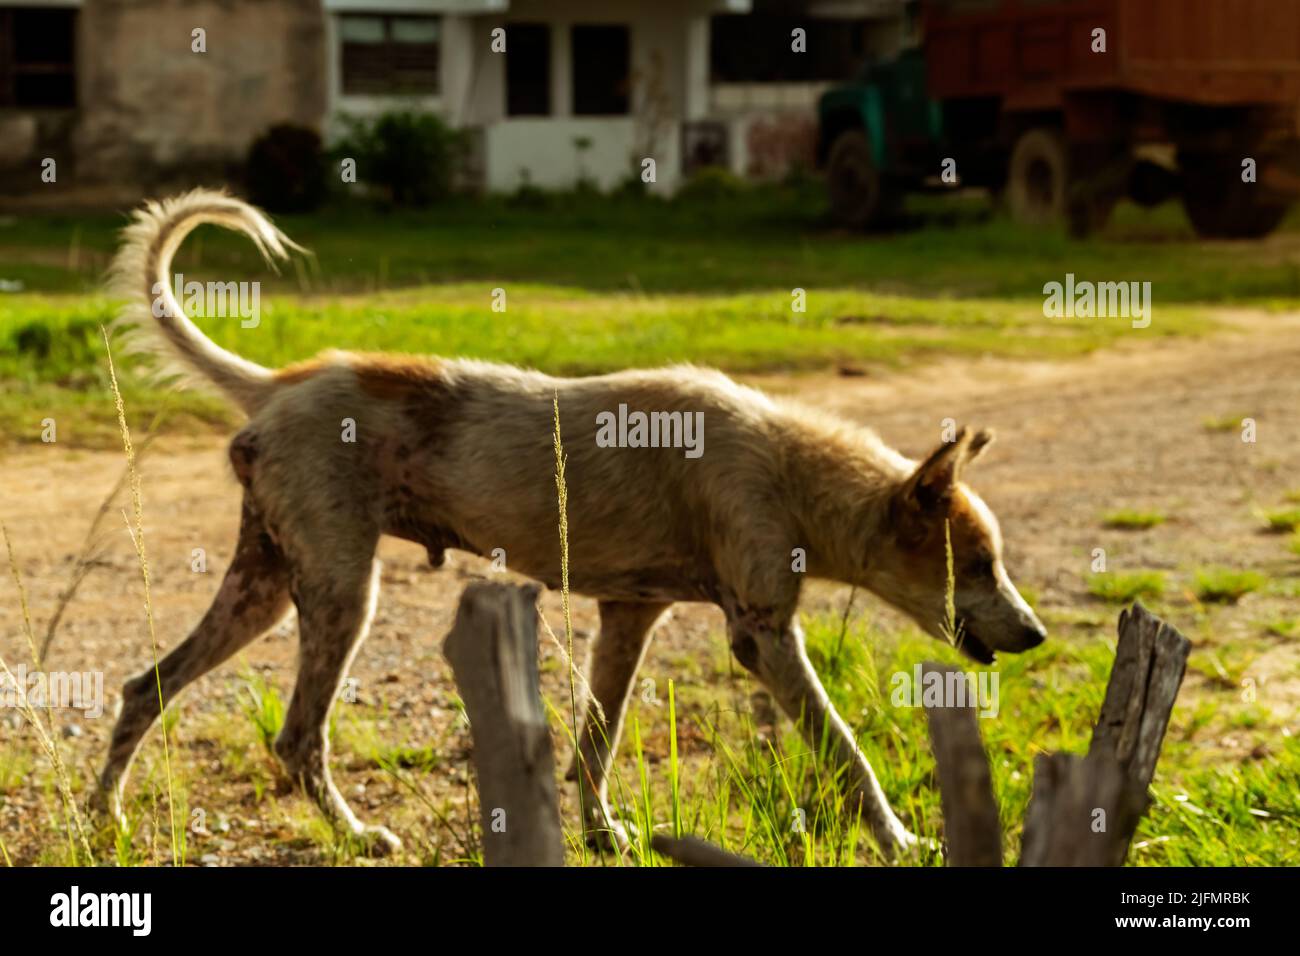 Photo of a brisk of grass under the sunset light, a stray male dog with his skin full of mange, is passing by in a blur behind it Stock Photo